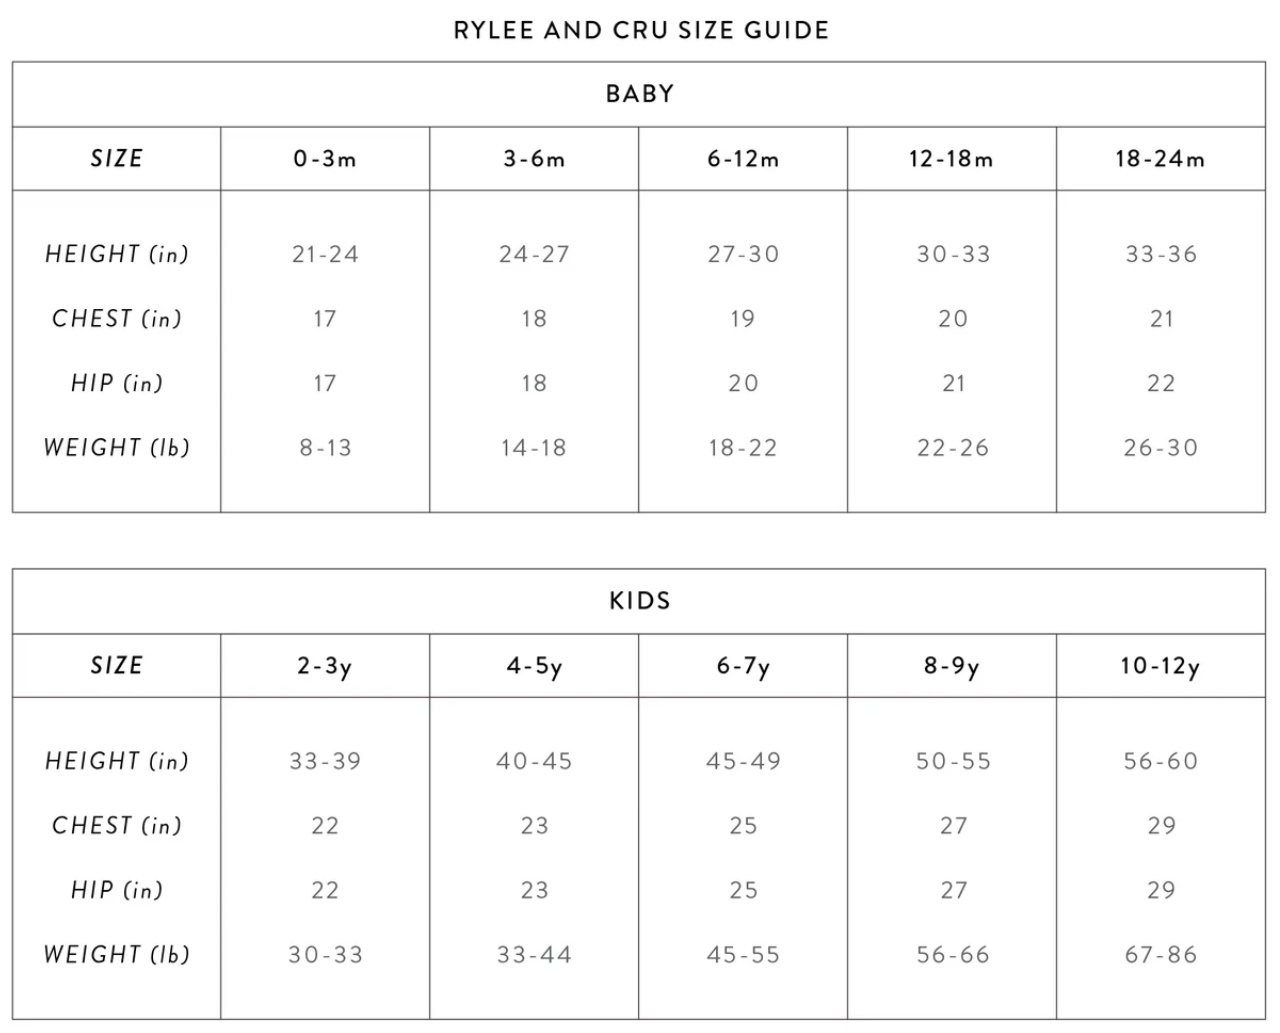 Rylee + Cru baby size guide